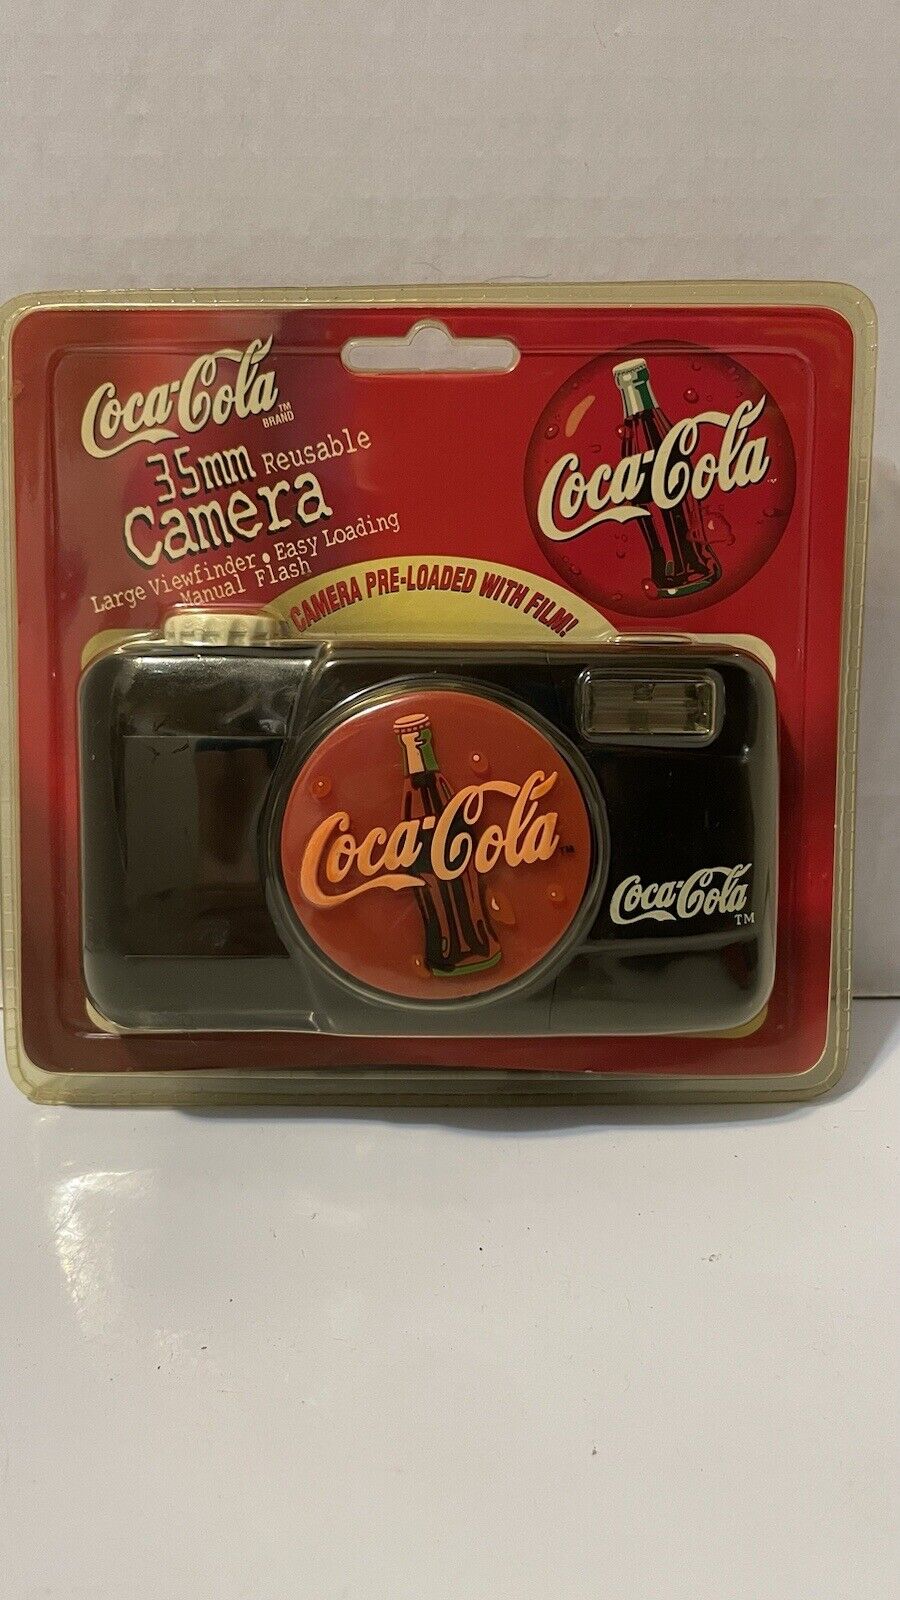 Vintage 1999 Coca-Cola 35mm Reusable Camera Pre-Loaded w/Film New Factory Sealed